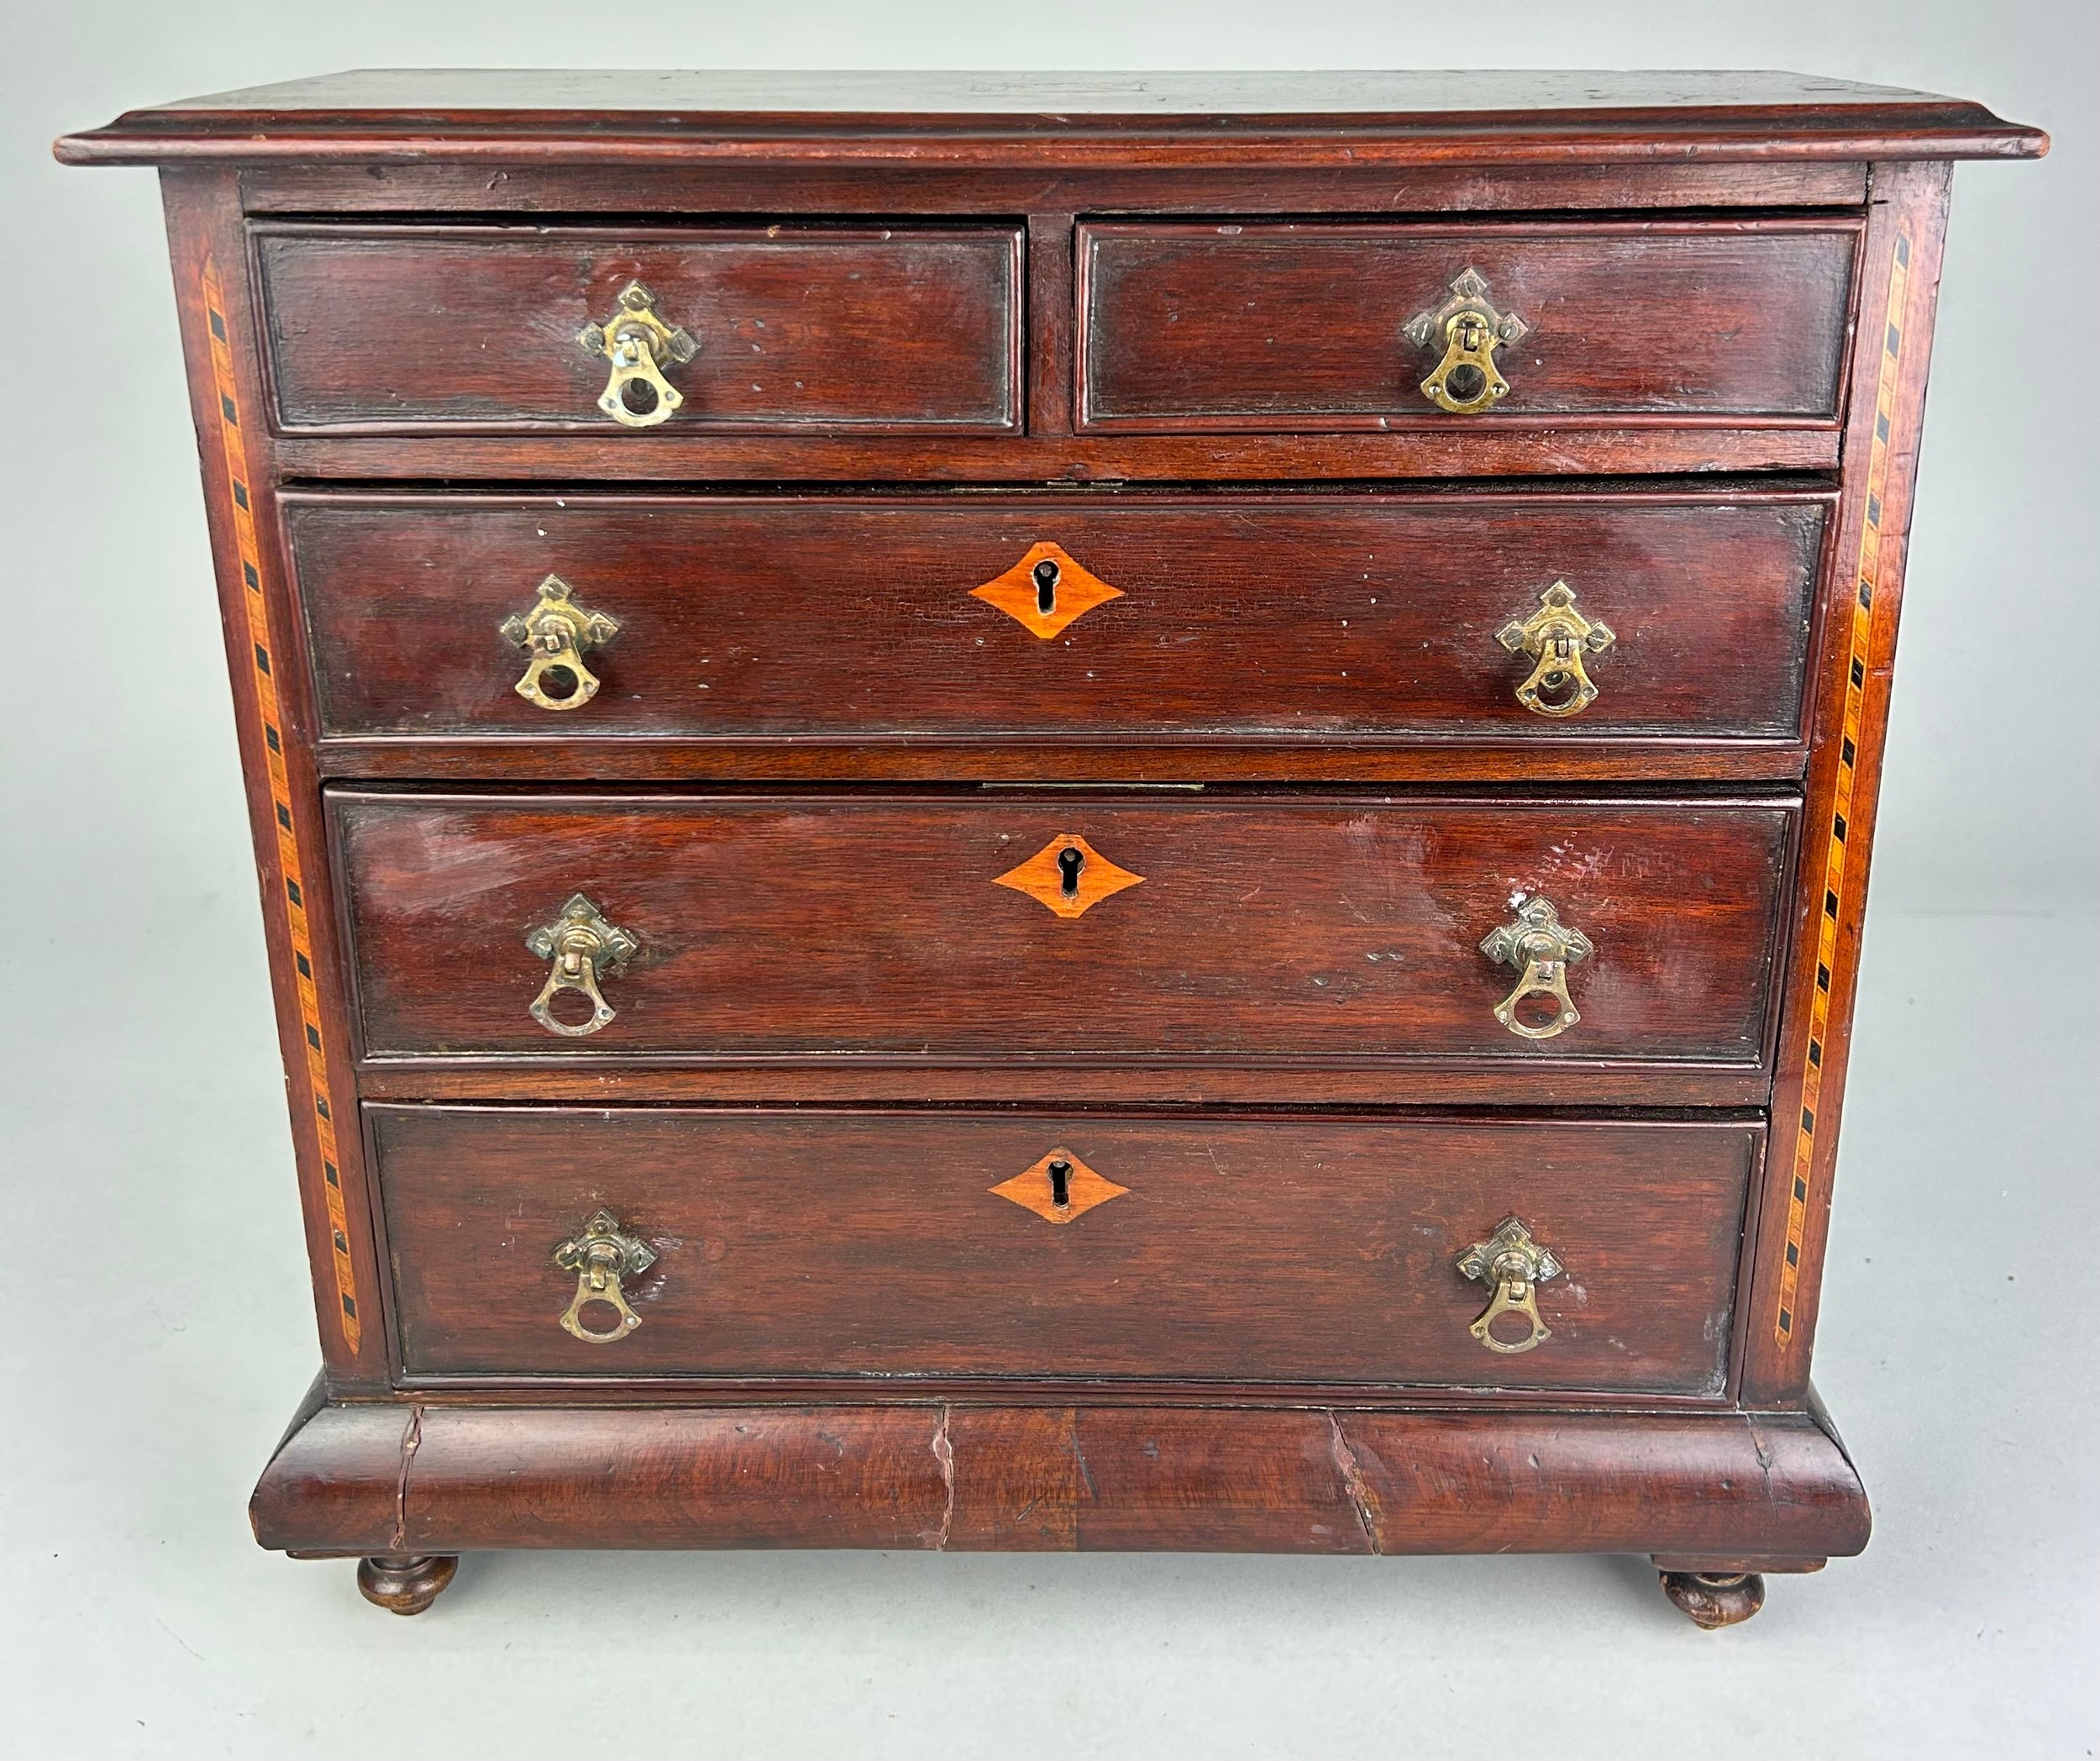 AN EARLY 19TH CENTURY APPRENTICE CHEST OF DRAWERS, With parquetry inlay raised on turned feet.